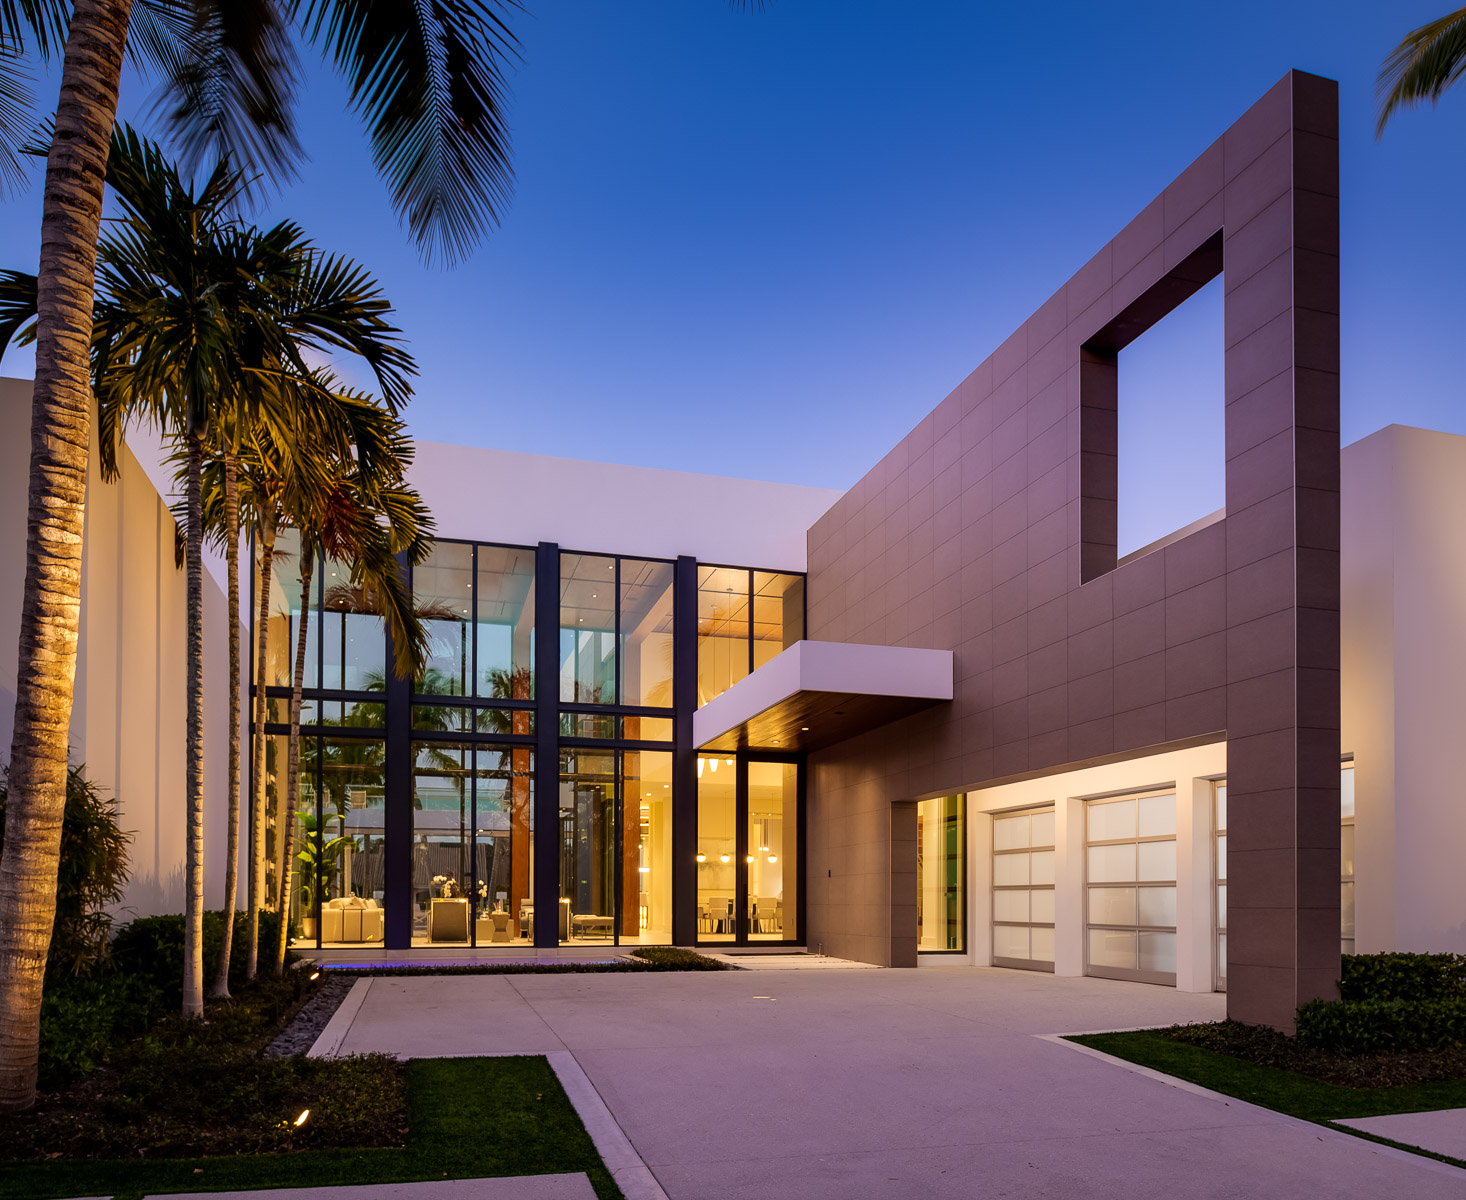 a modern home with palm trees and a driveway.